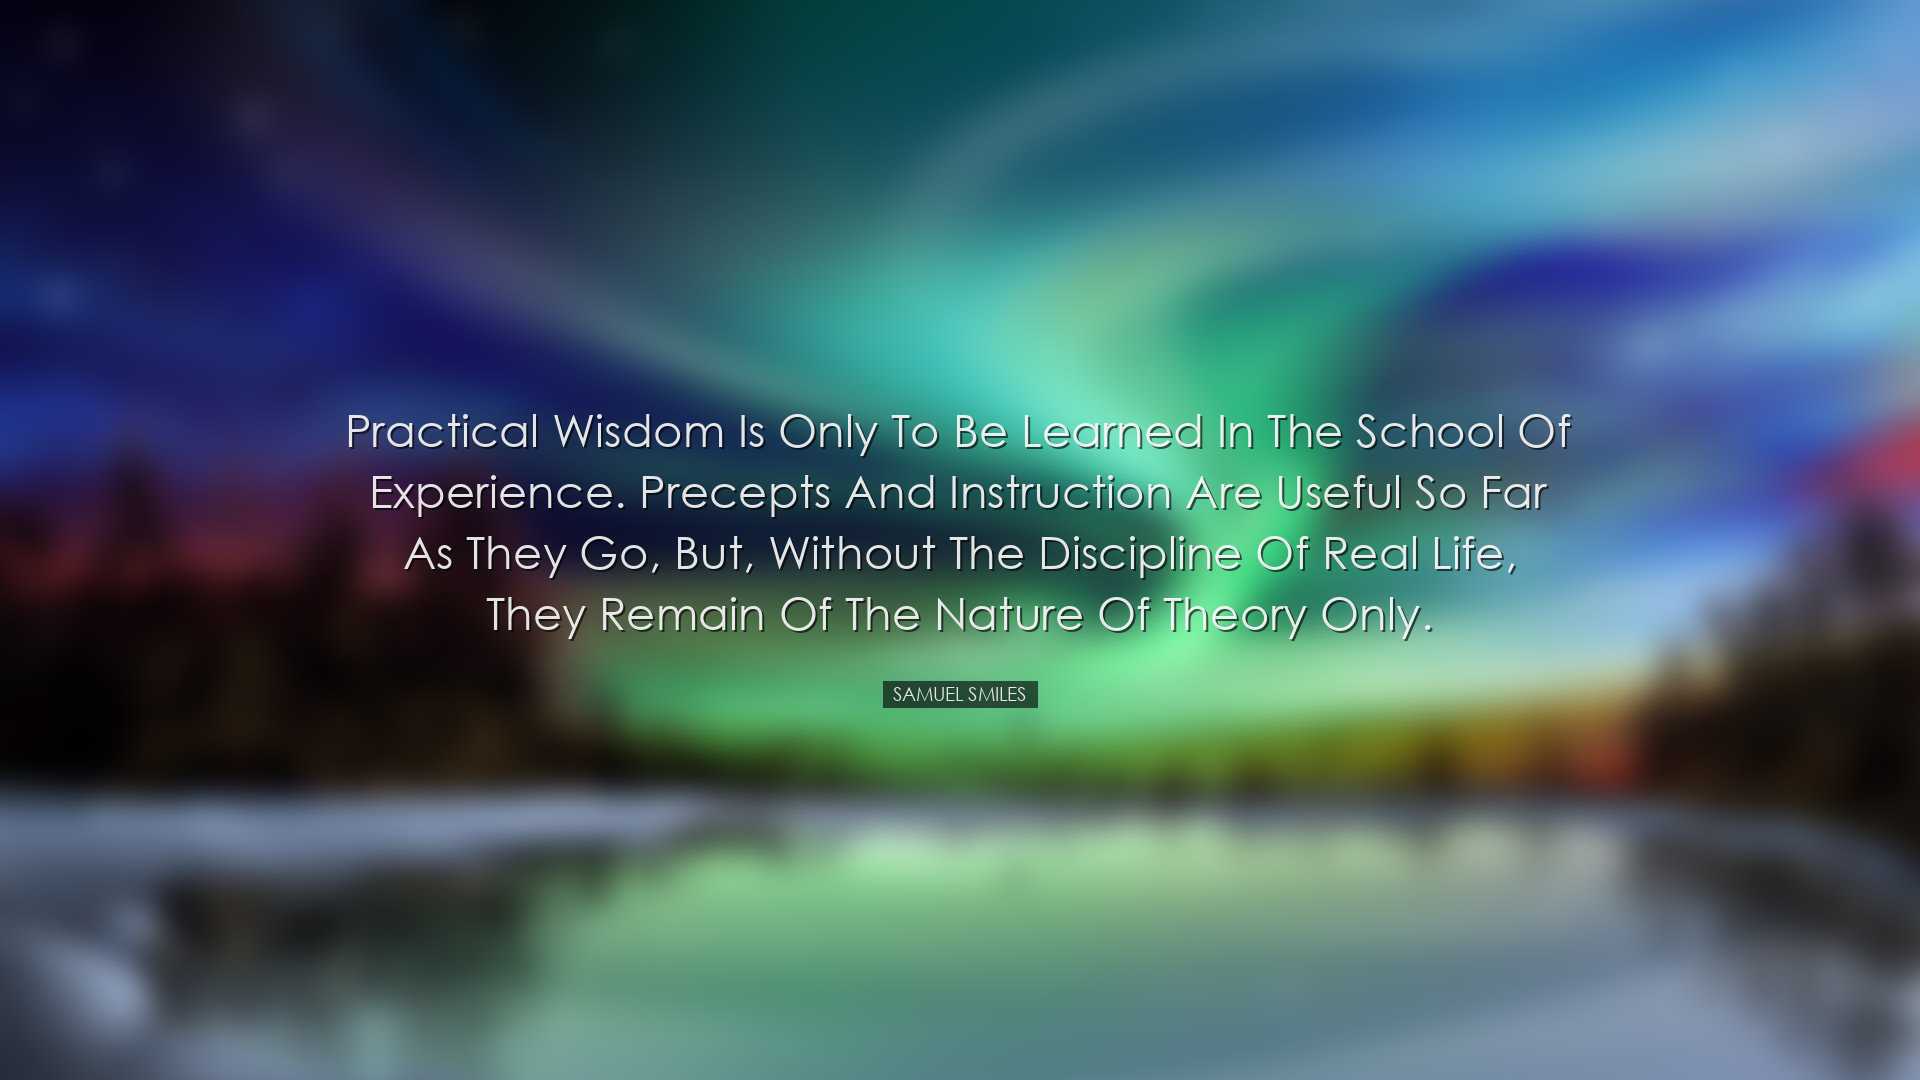 Practical wisdom is only to be learned in the school of experience